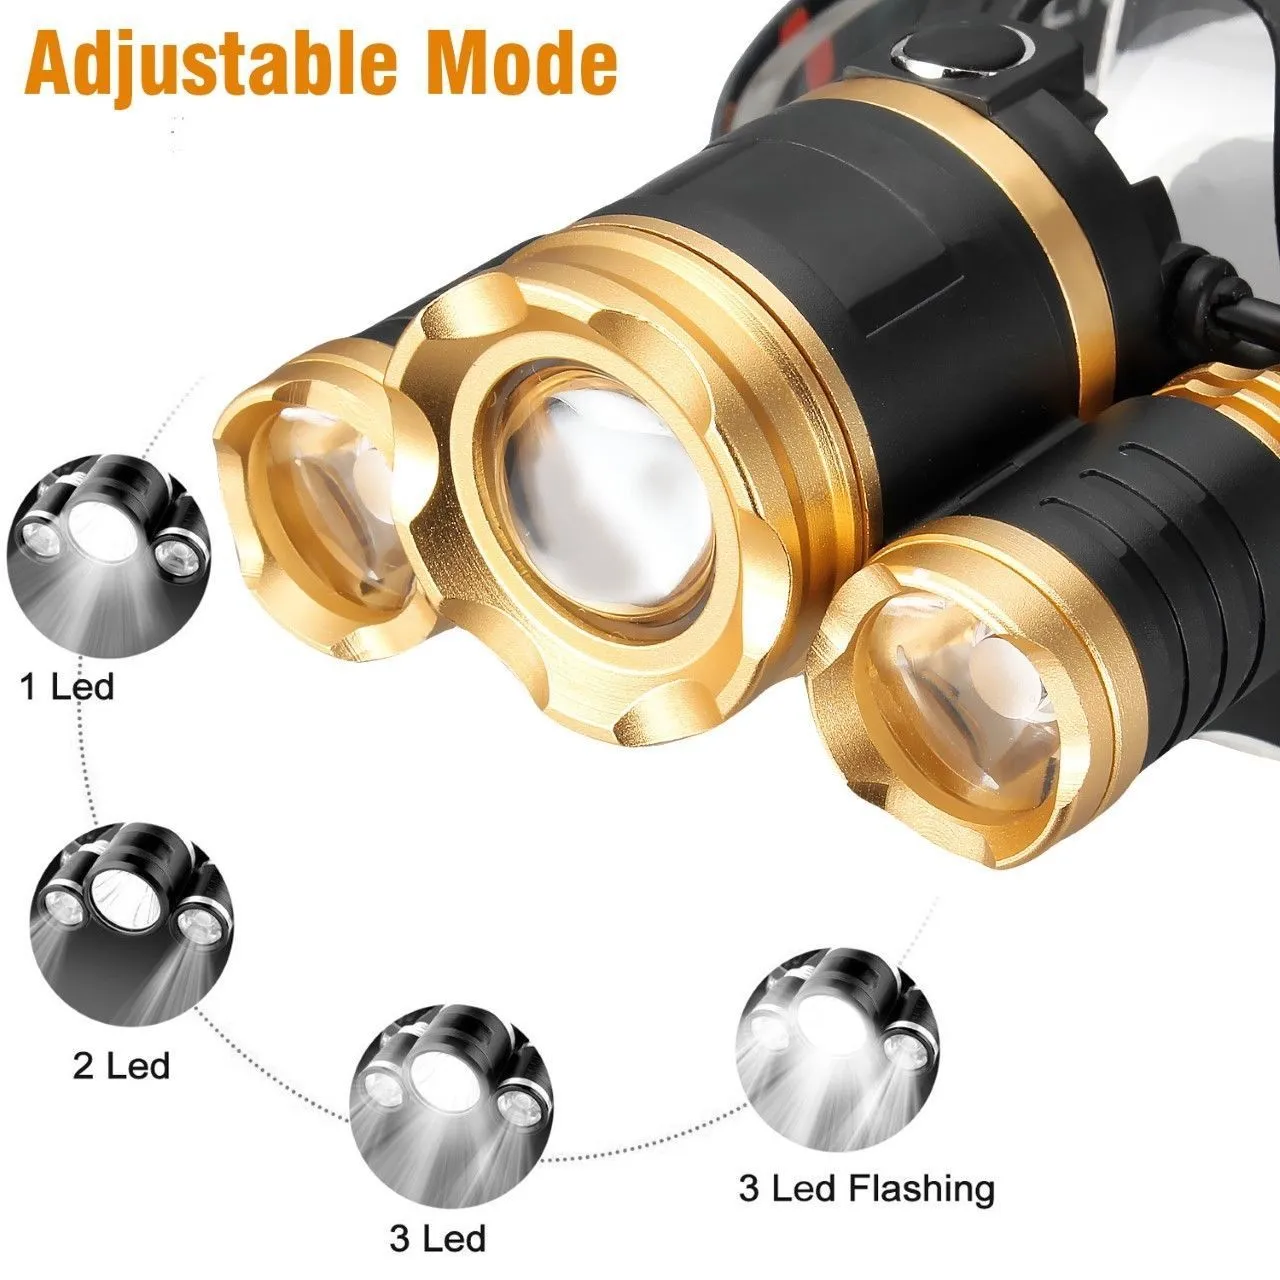 12000 Lumens Hunting Headlamp 3x XML T6 LED Headlight Head Torch Lamp Camping Zoom Head Light Flashlight 18650 Battery +Charger +Car Charger